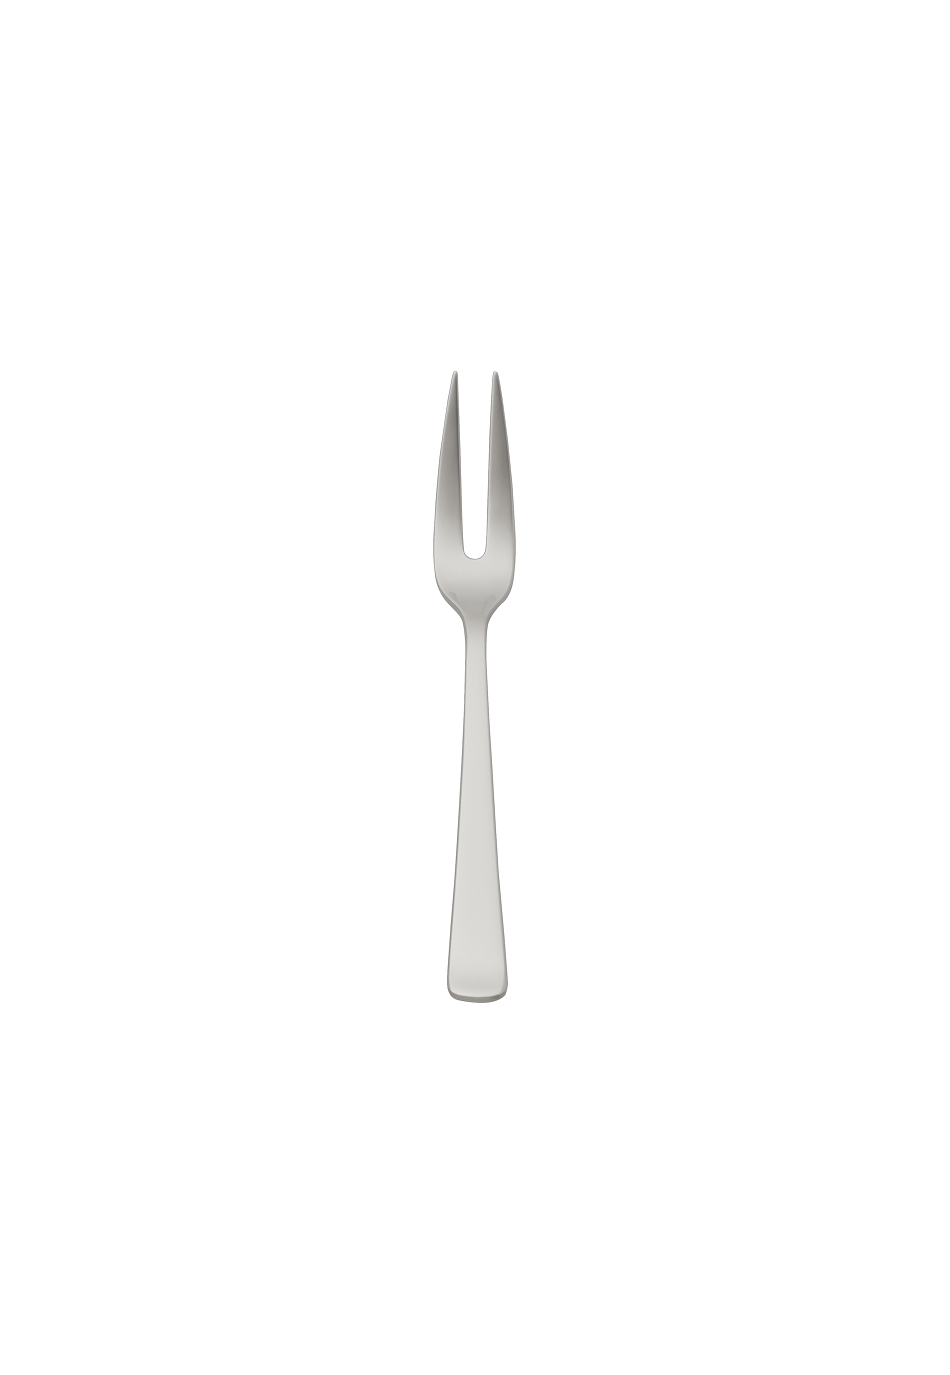 Atlantic Brillant Meat Fork, small (18/8 stainless steel)